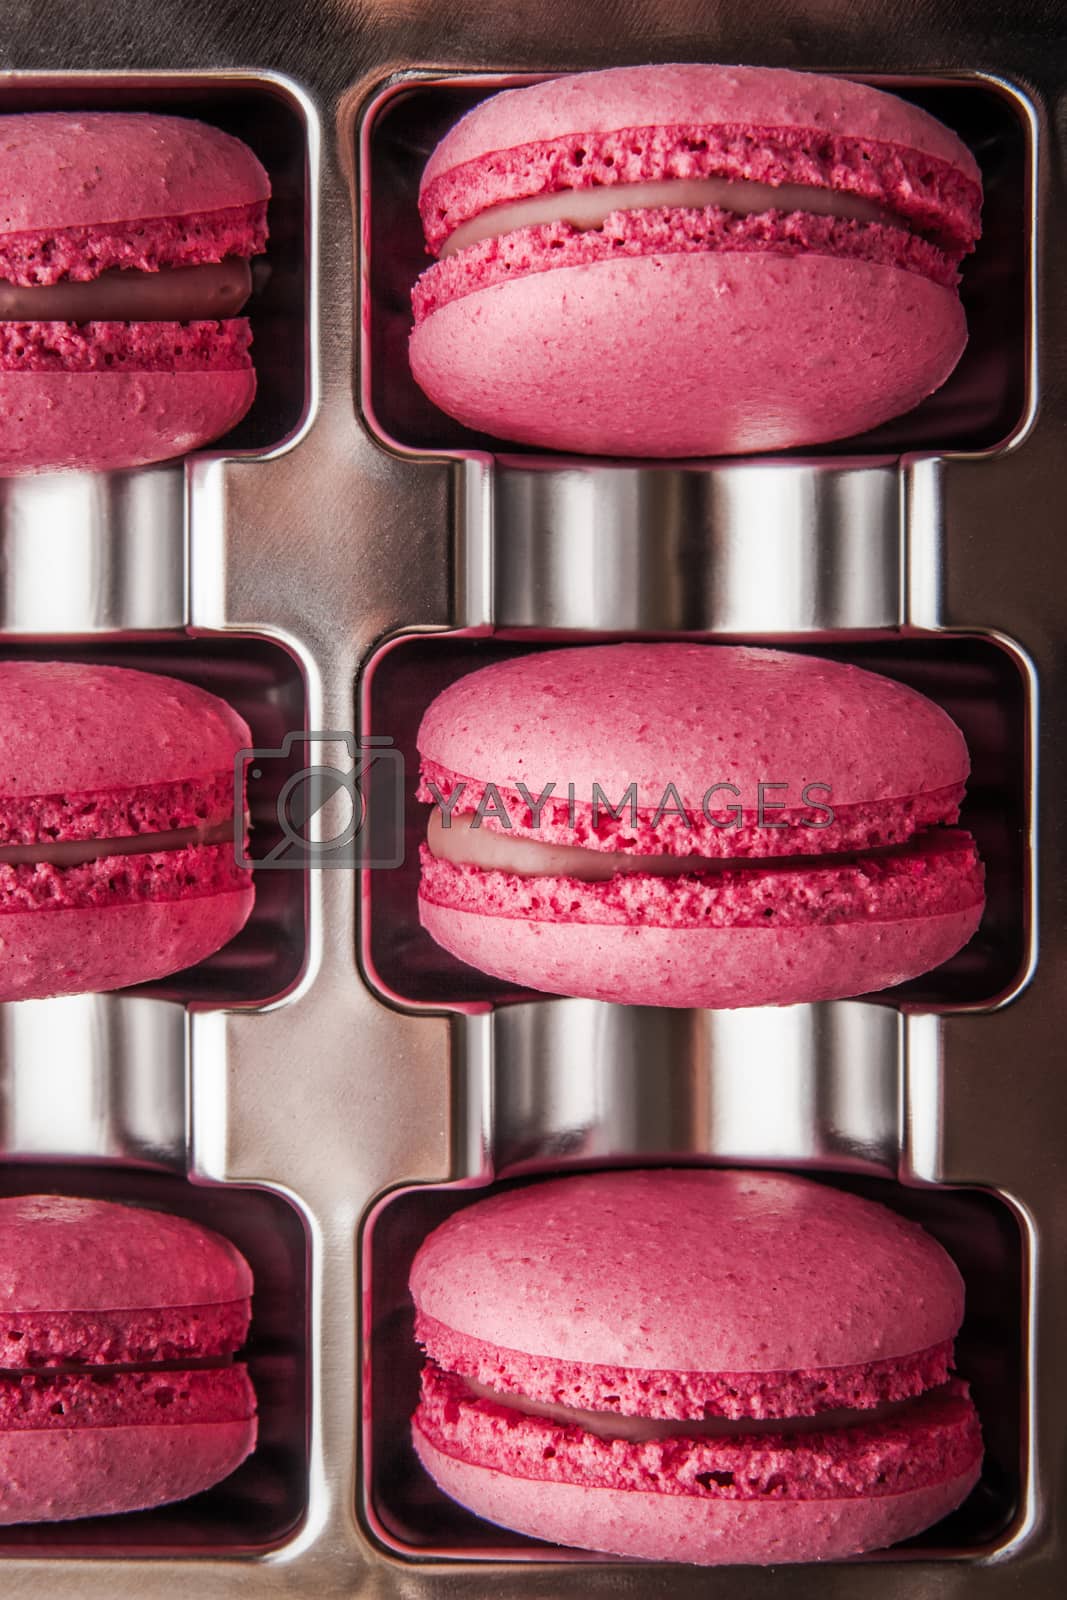 Royalty free image of Macaroon raspberry in a box of foil by Deniskarpenkov